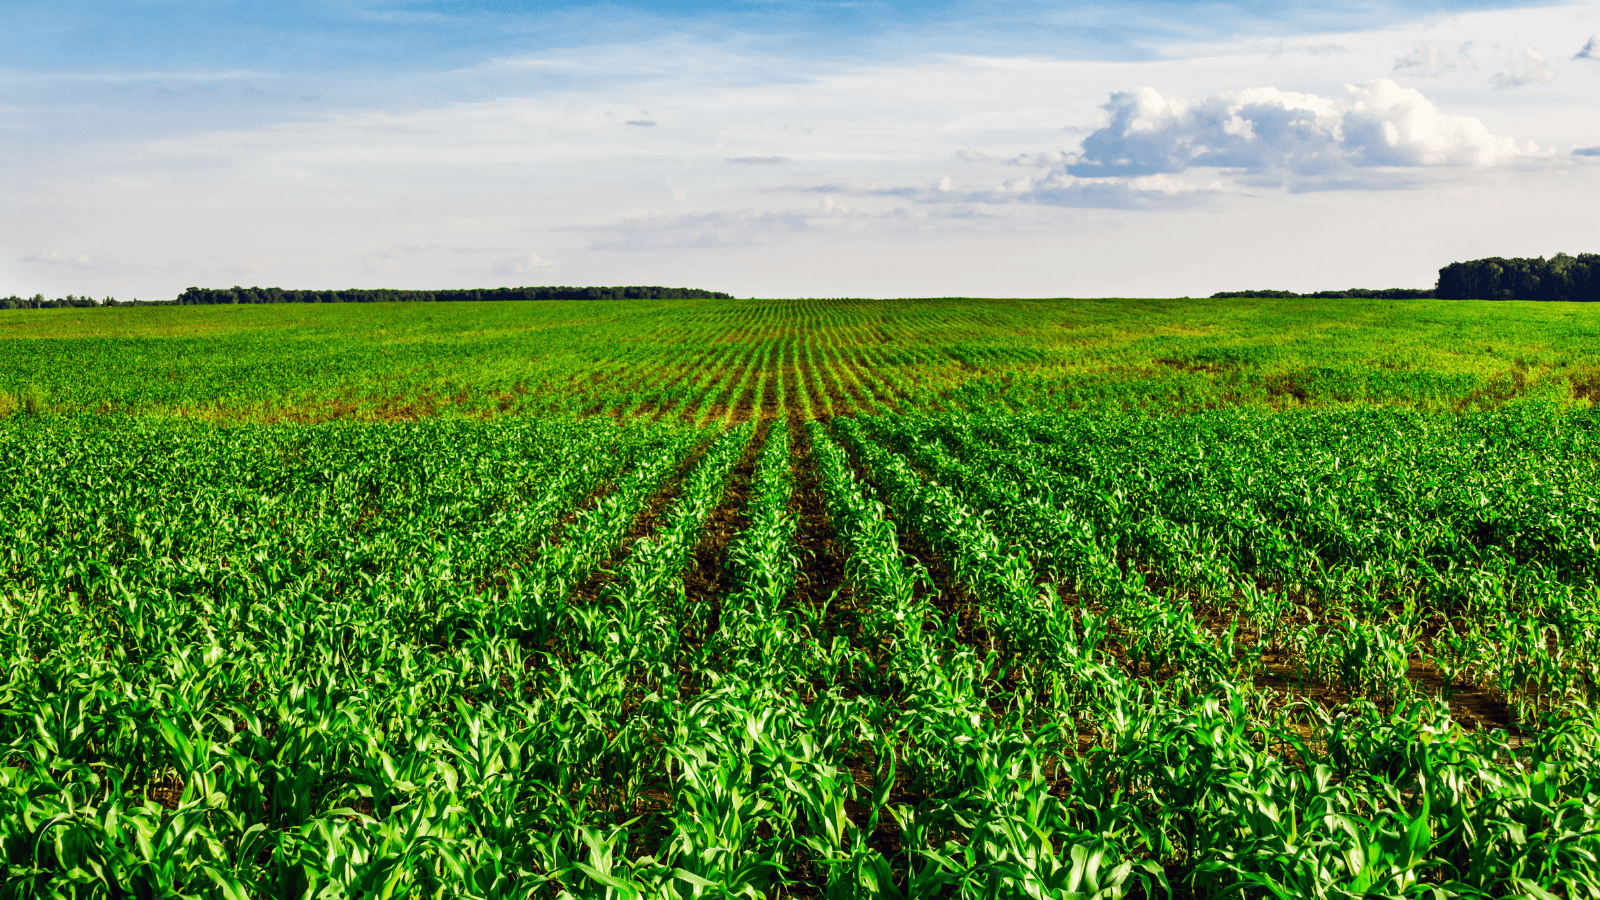 Rows and rows of small green crops in a large field. A blue sky with clouds in the horizon. 